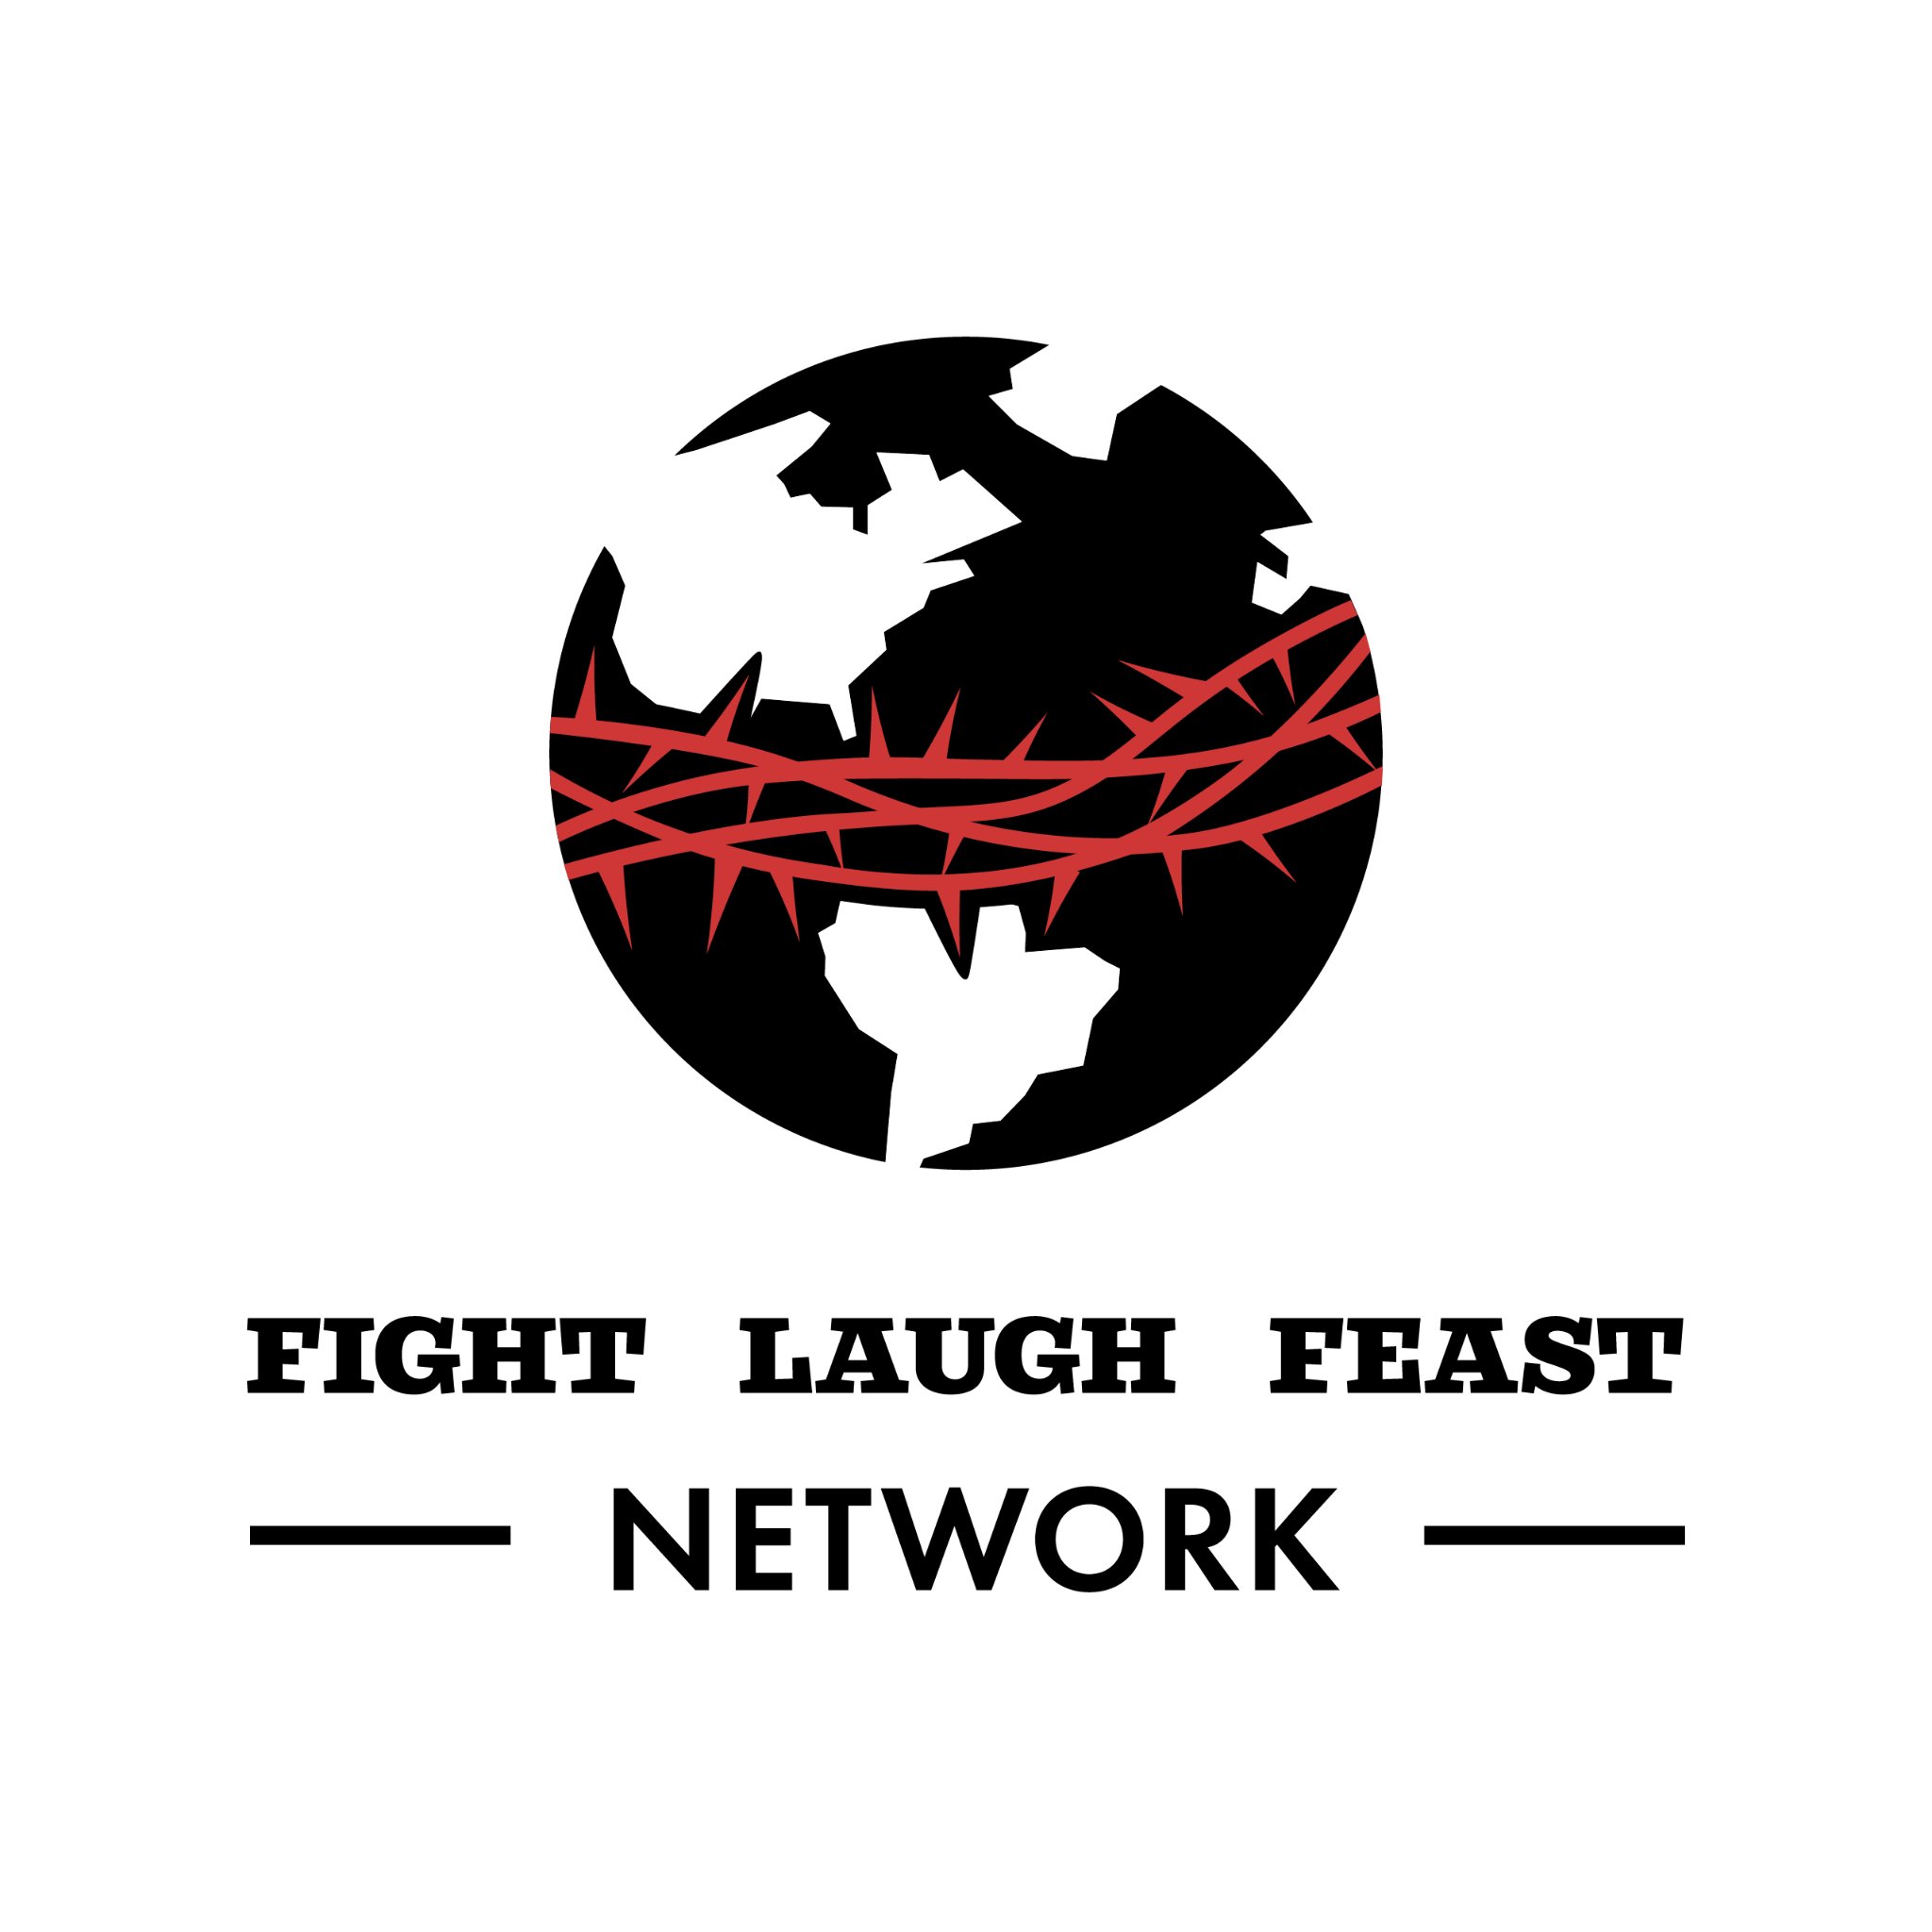 Join us at our 6th annual Fight Laugh Feast Conference in Forth Worth October 31st through November 2nd: https://t.co/HVnBQa6uQl